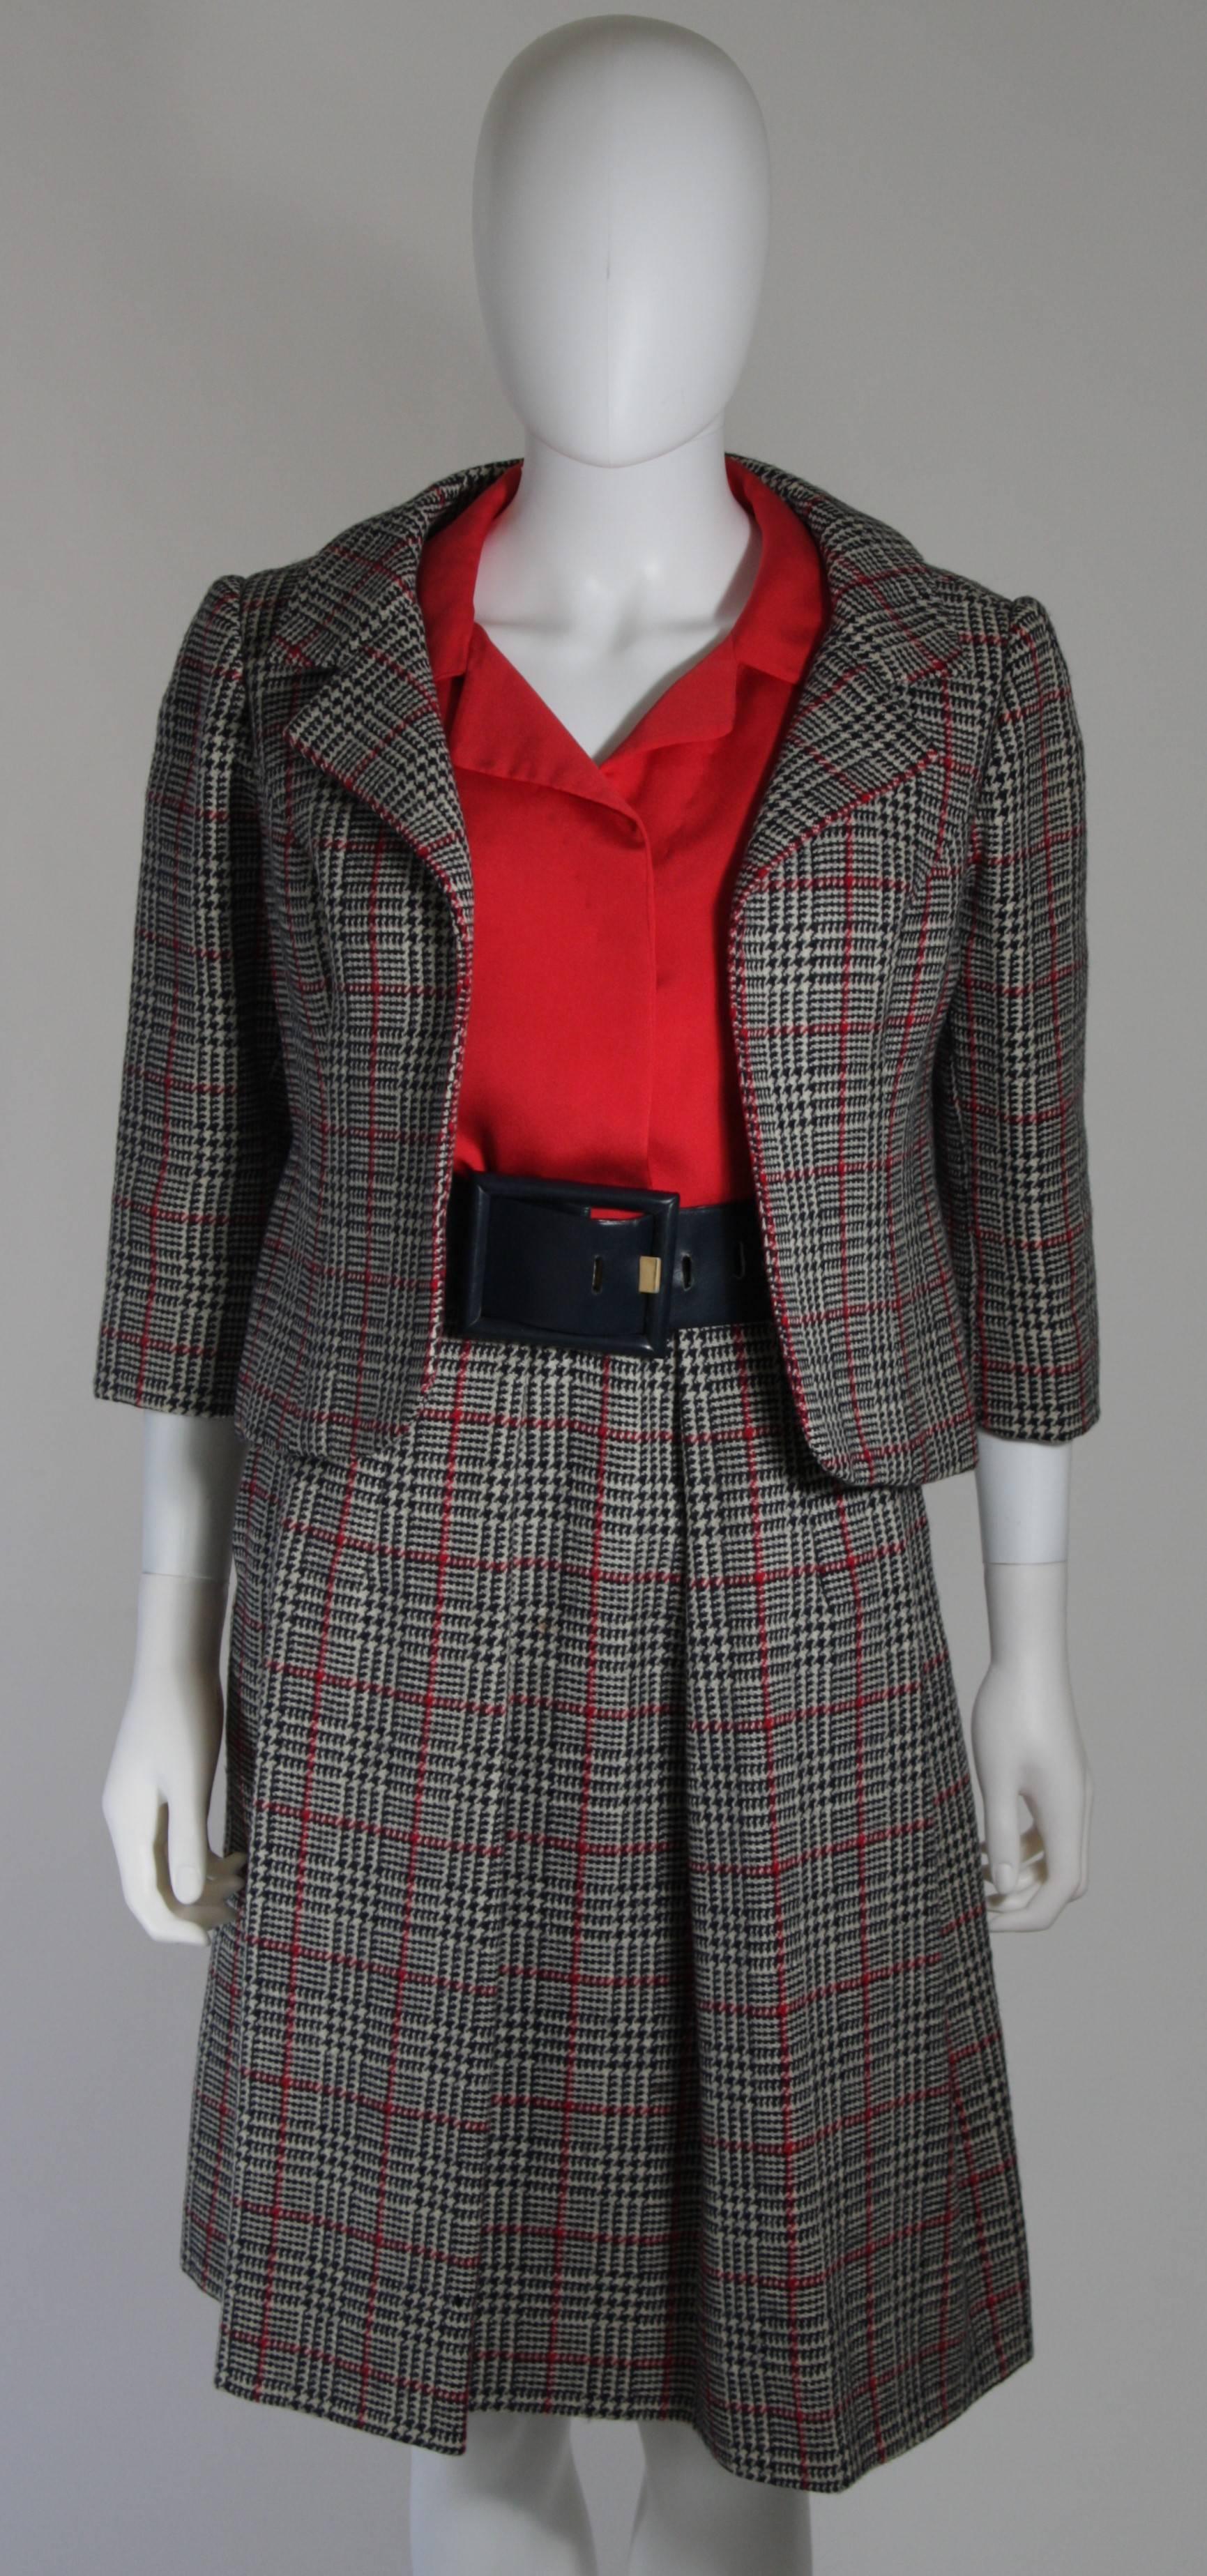 Galanos Black White and Red Wool Plaid Skirt Suit 4 Piece Size Small ...